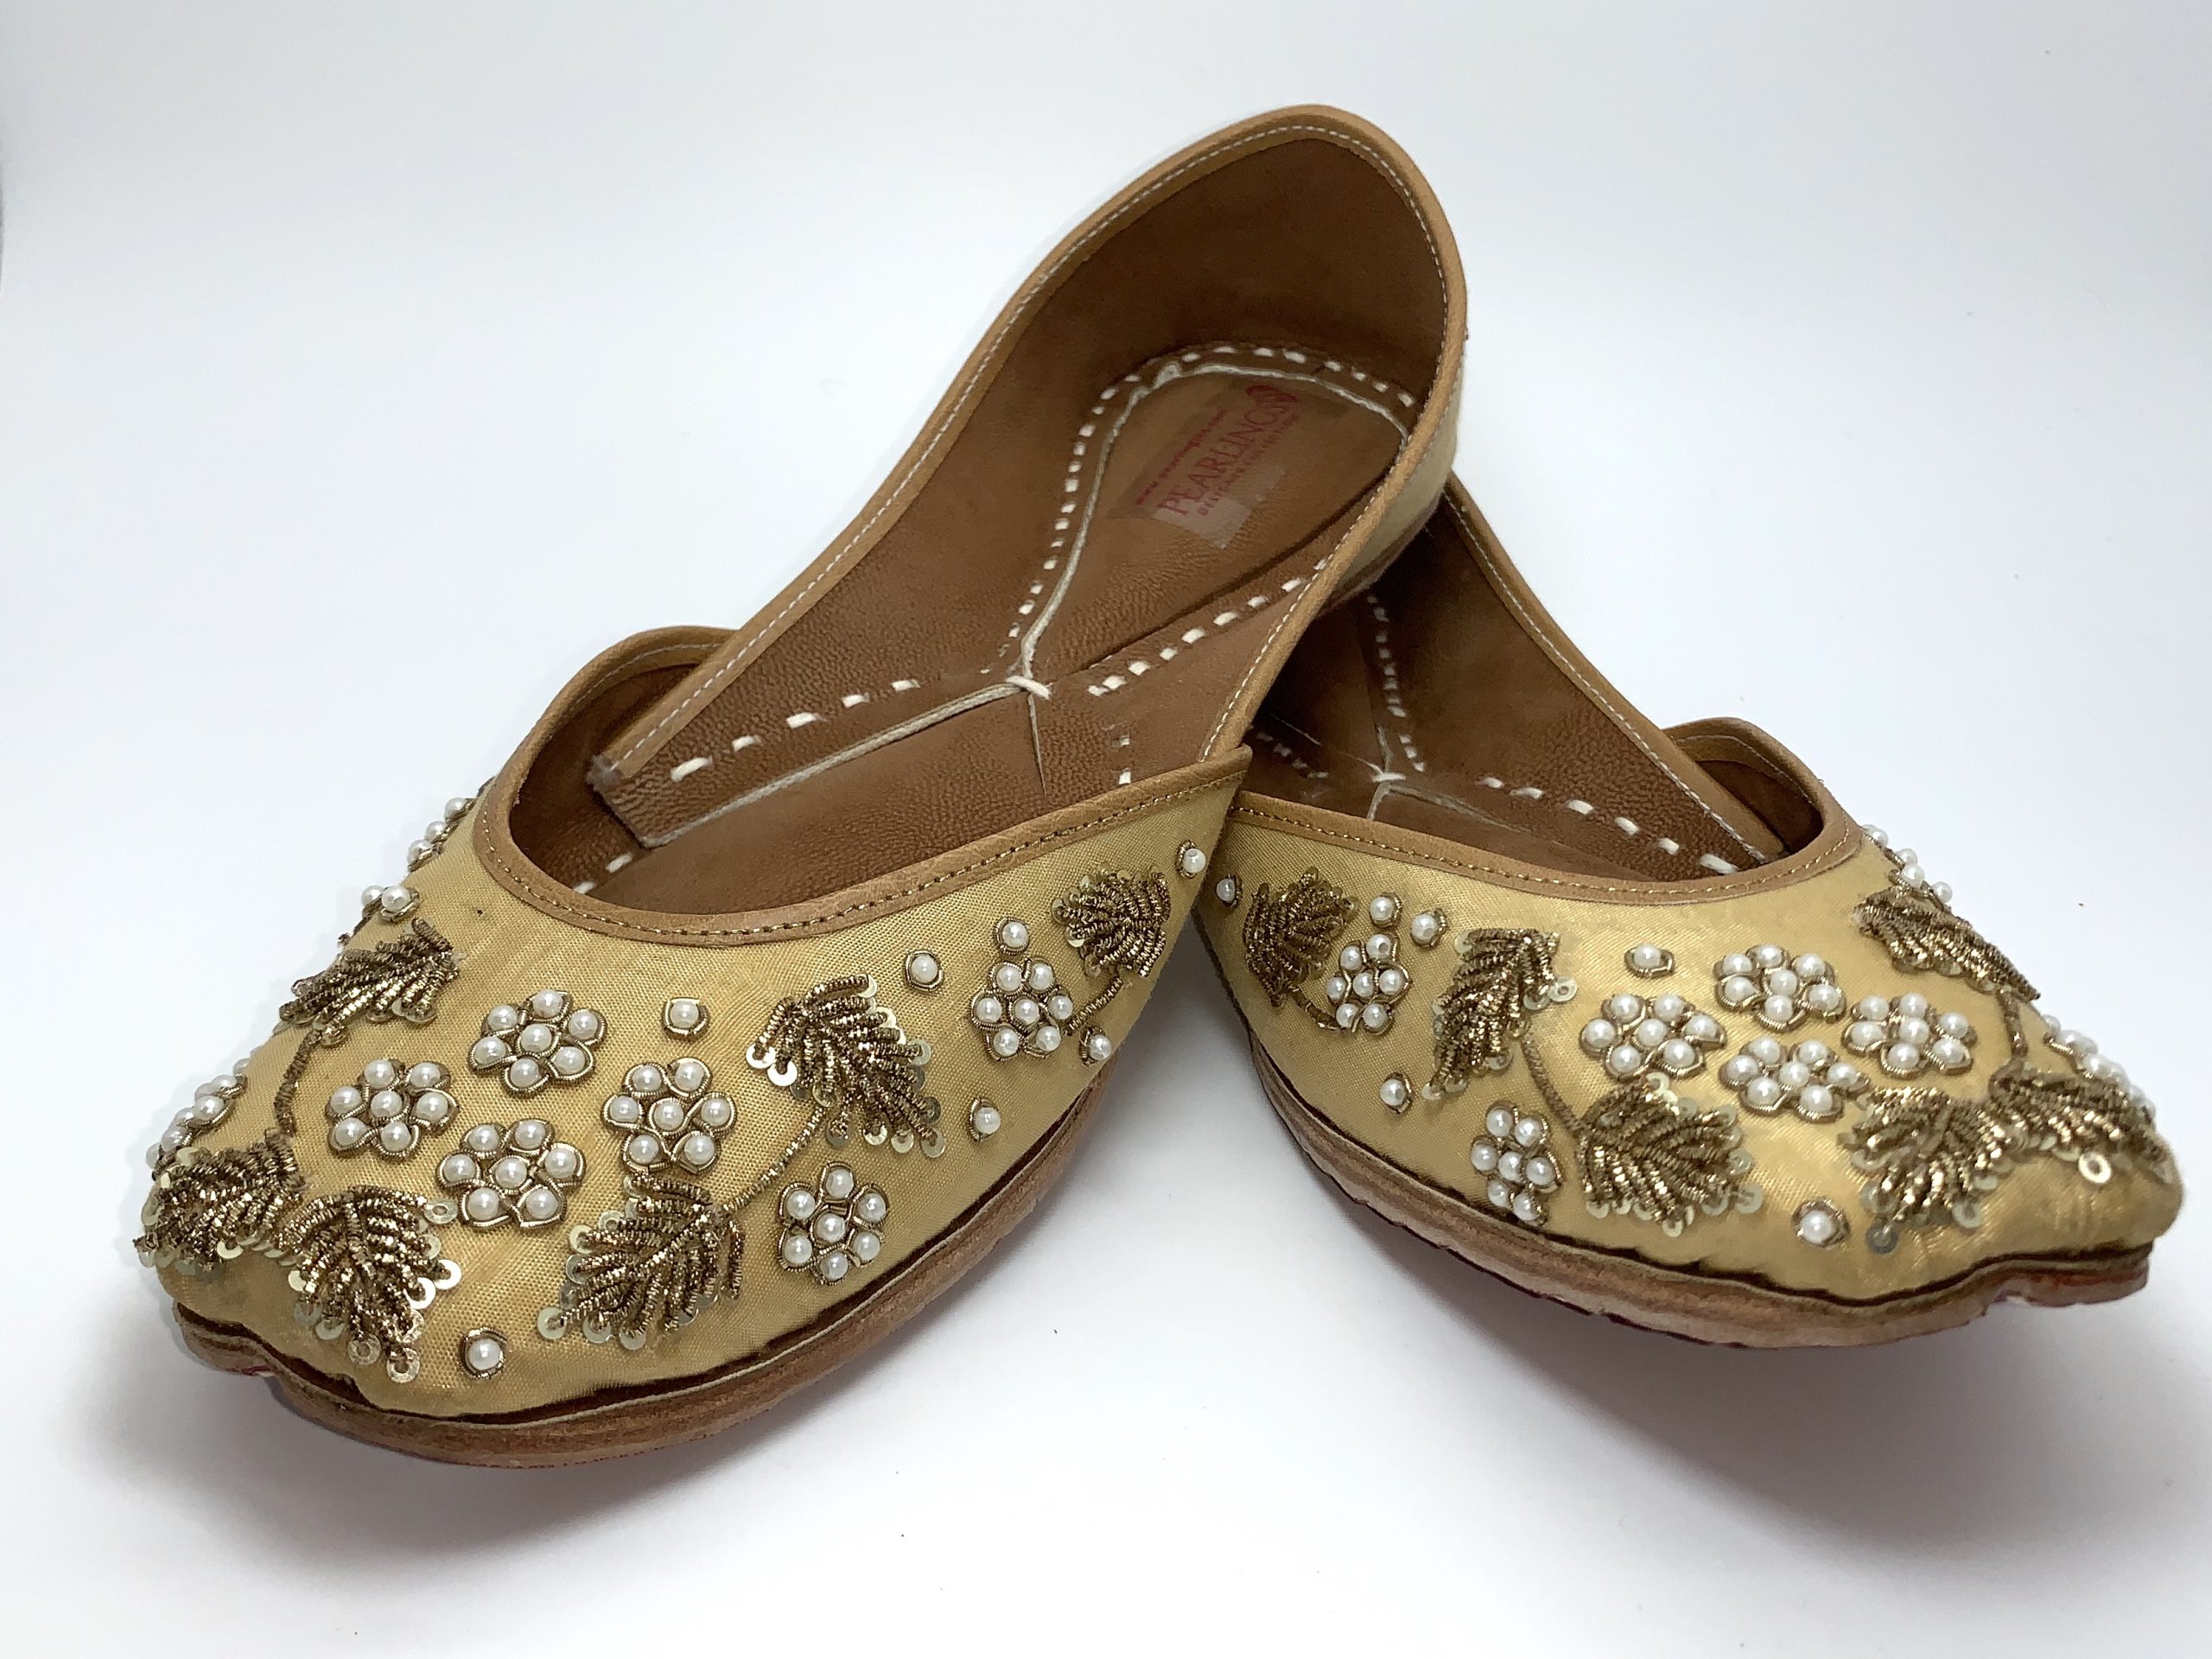 Ehtnic genuine leather shoes with embroidery | Pearlings Designer ...